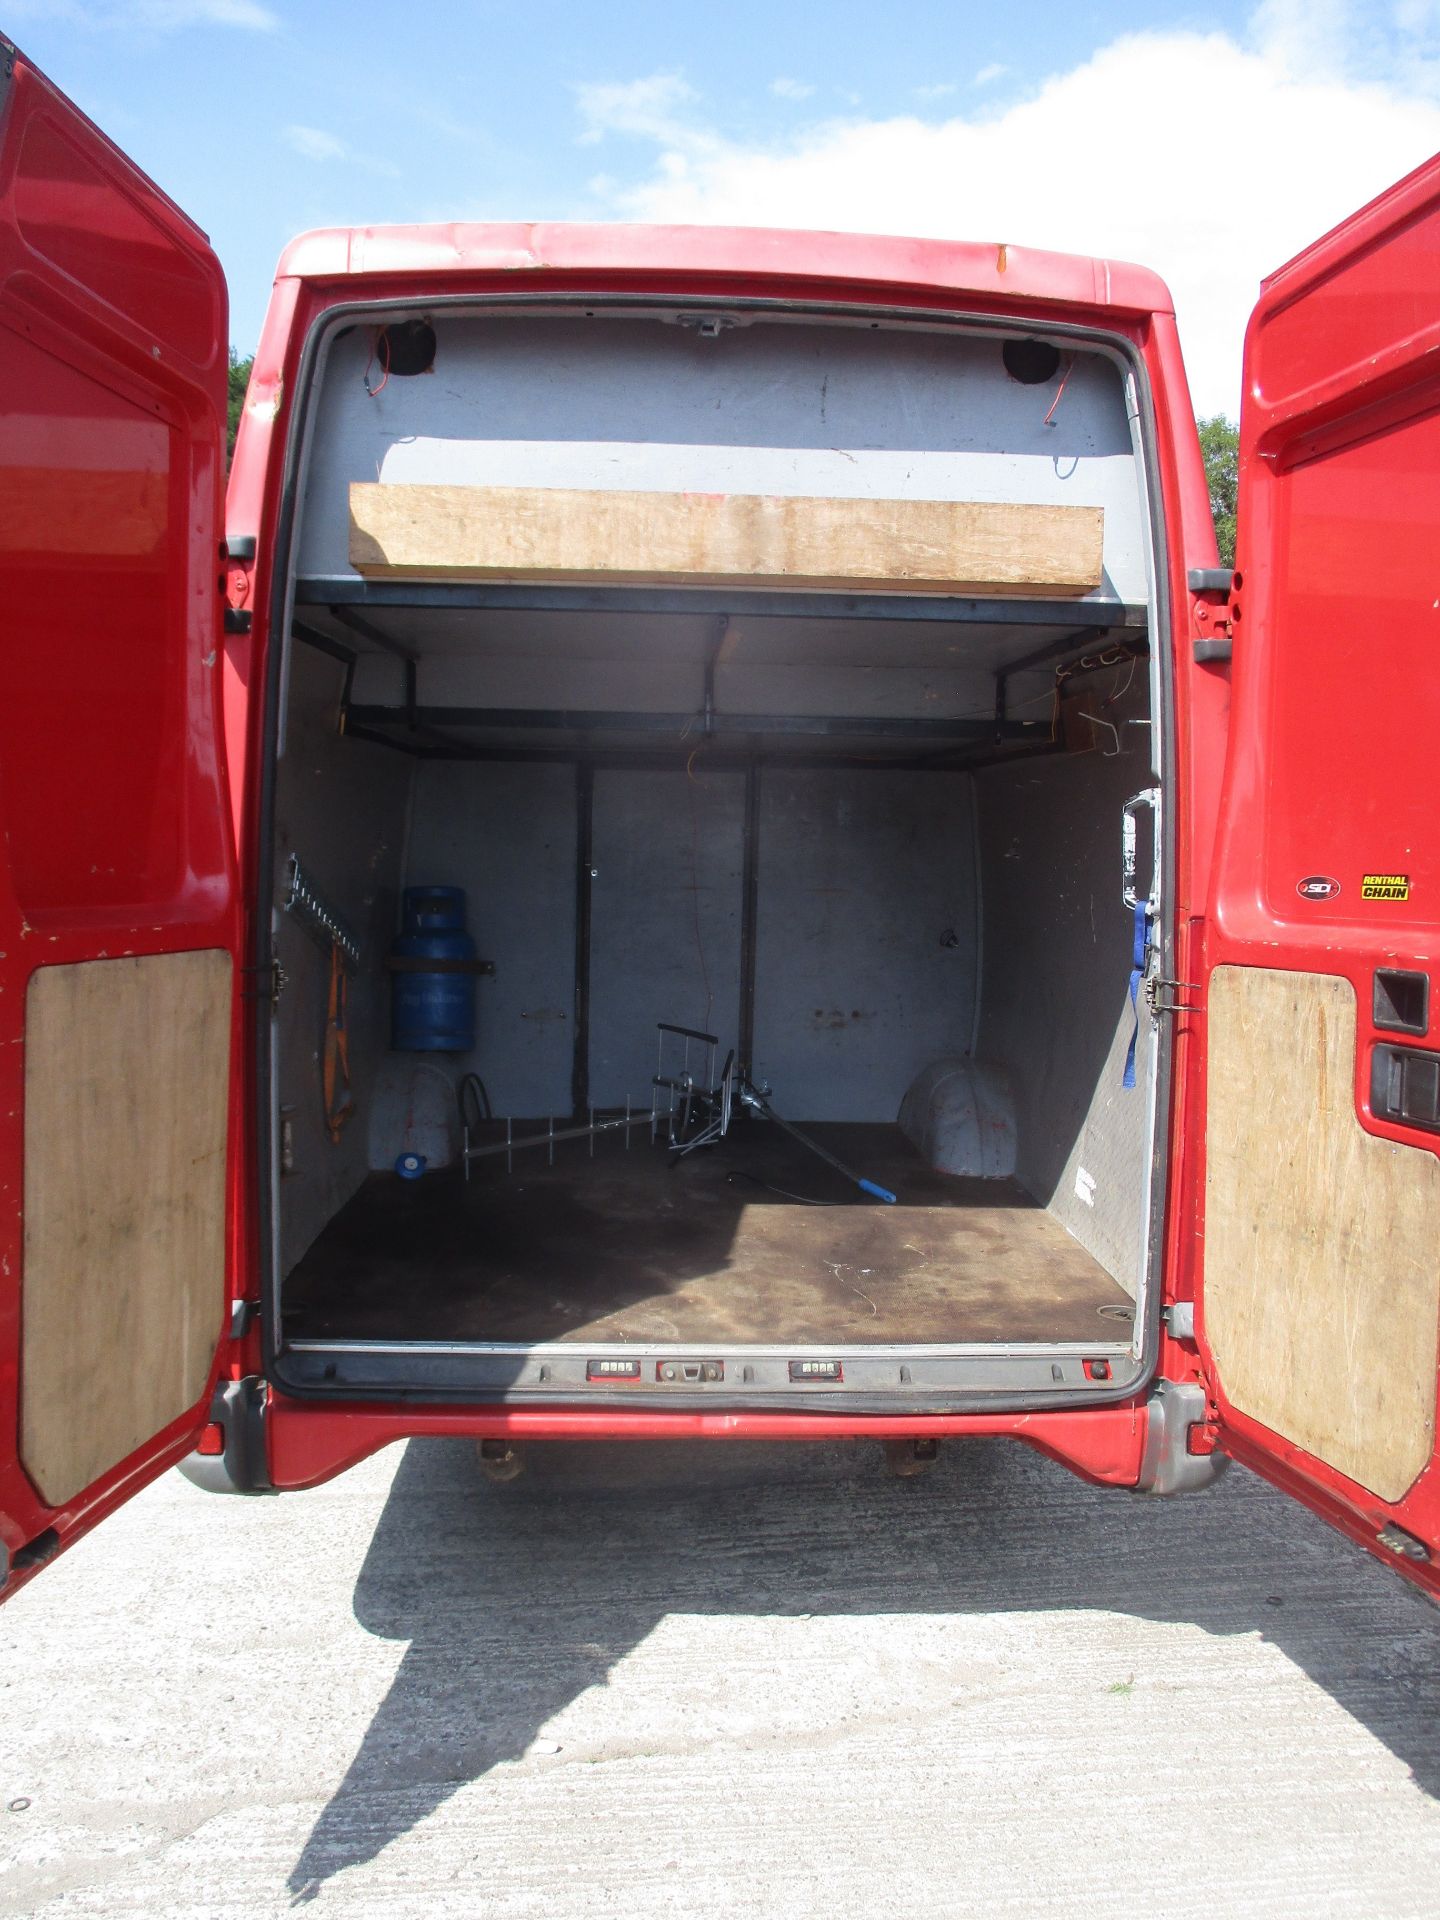 04/54 IVECO DAILY 35S12 LWB - 2300cc 5dr Van (Red, 132k) - Image 9 of 9